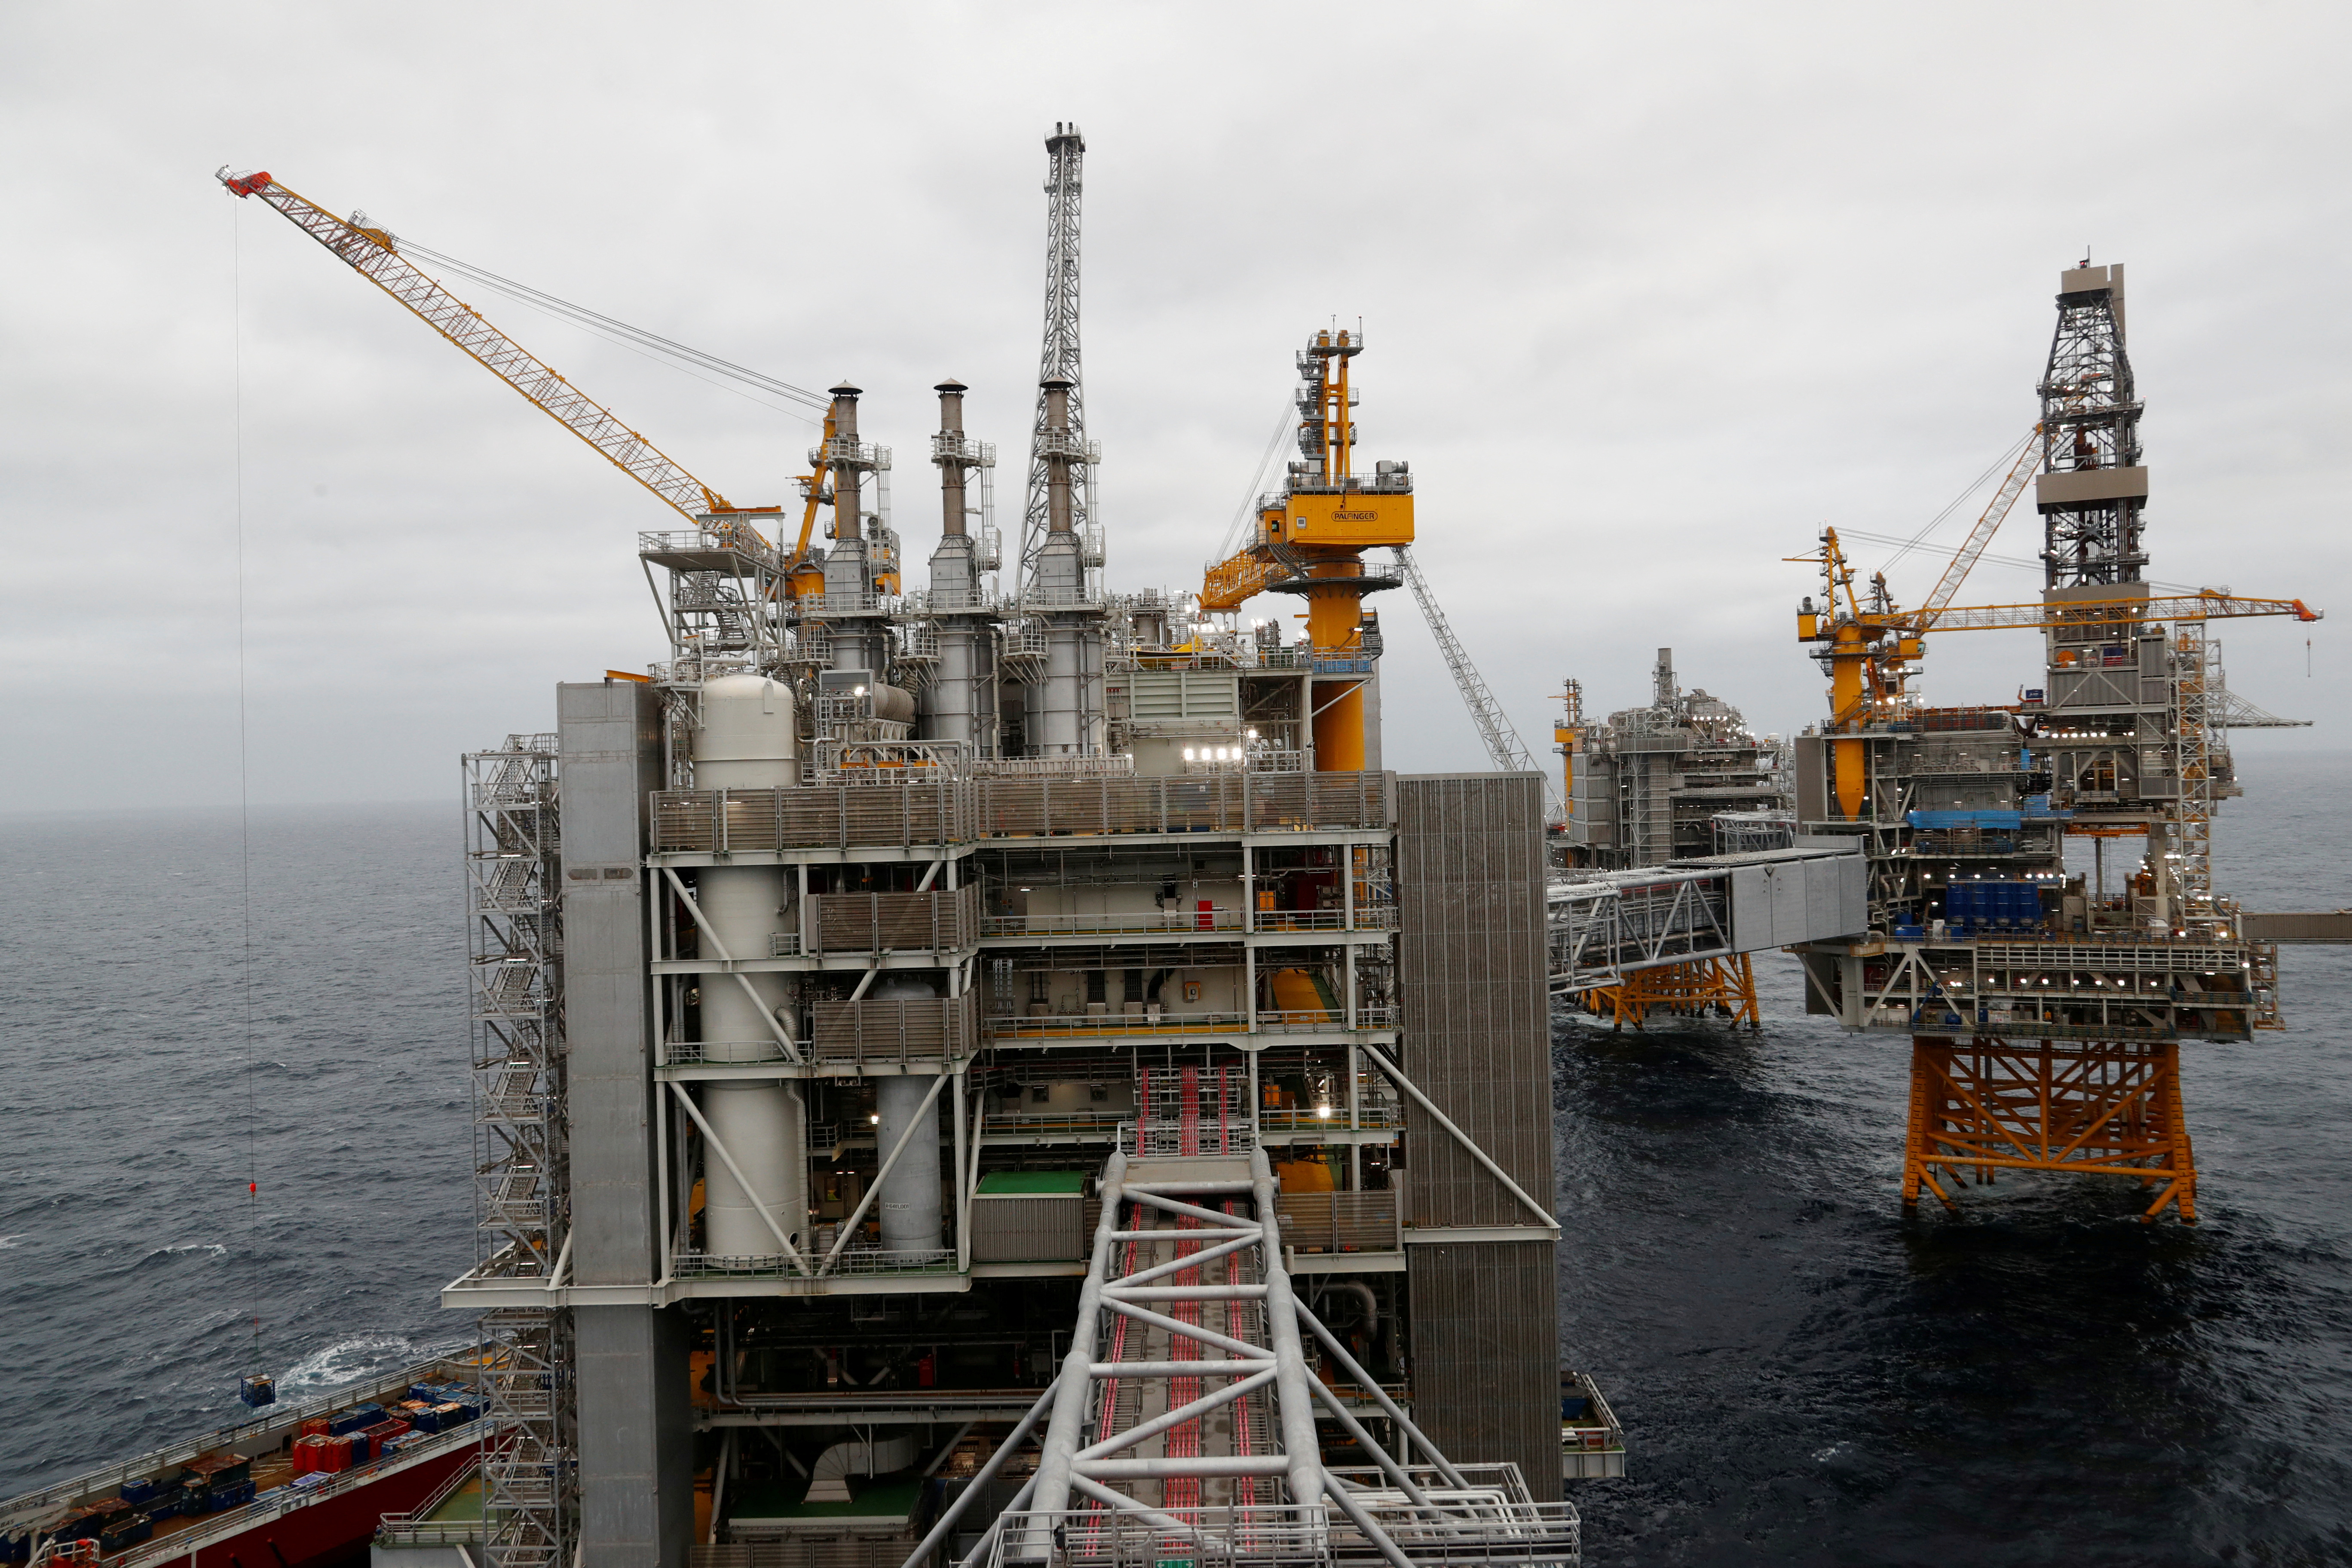 A general view of the Equinor's Johan Sverdrup oilfield platforms in the North Sea